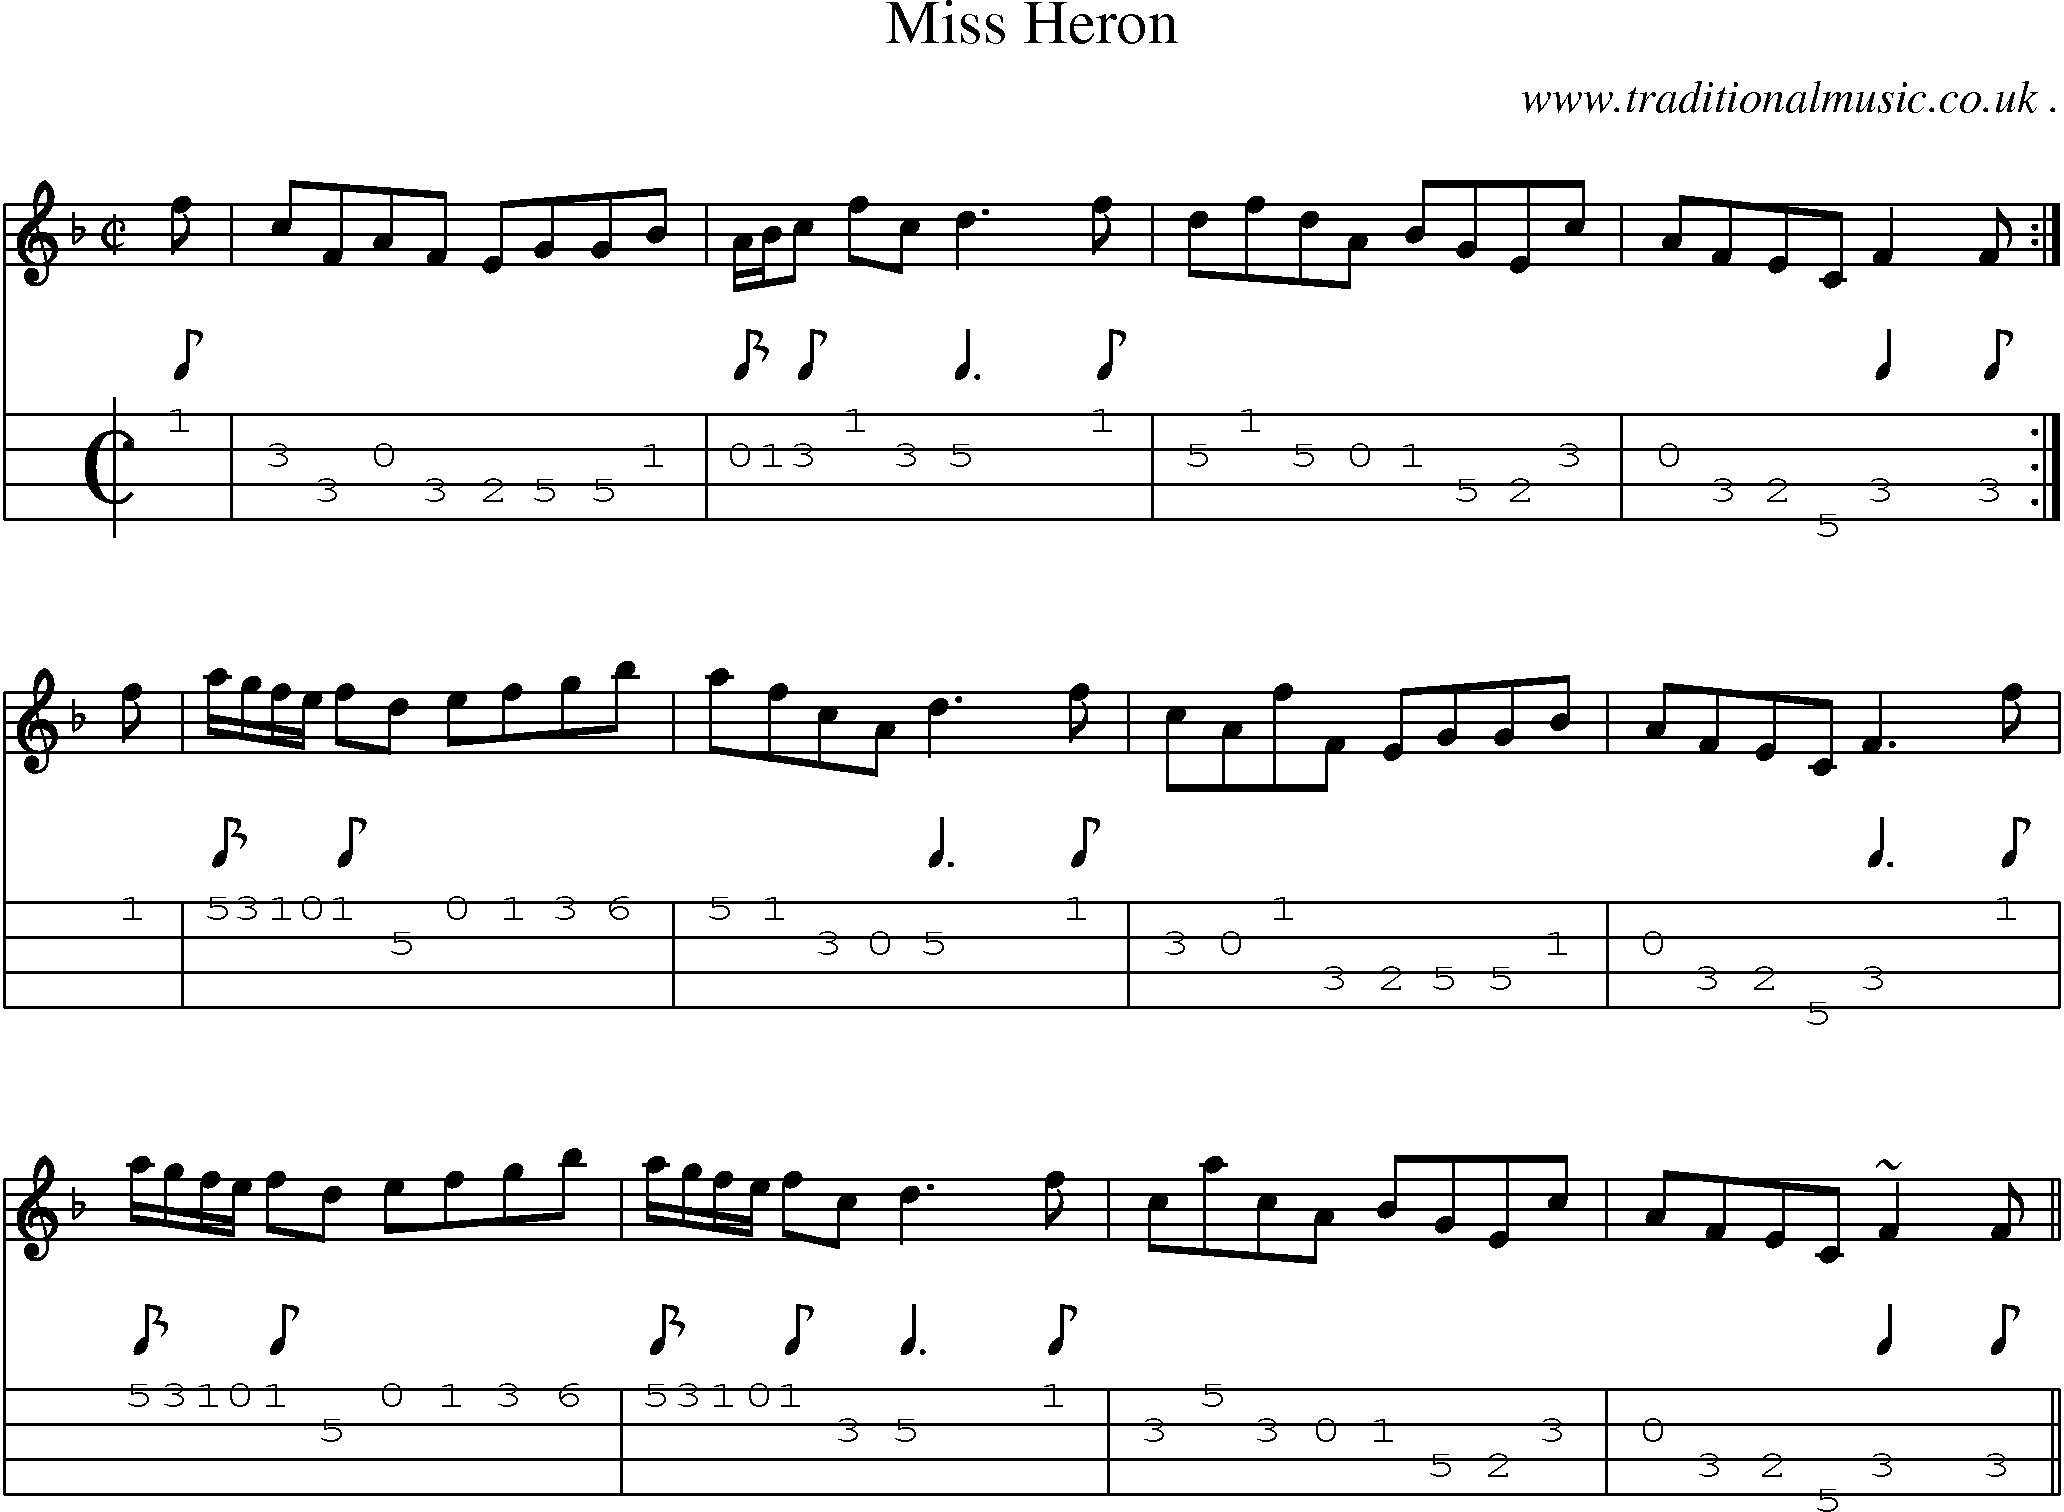 Sheet-music  score, Chords and Mandolin Tabs for Miss Heron